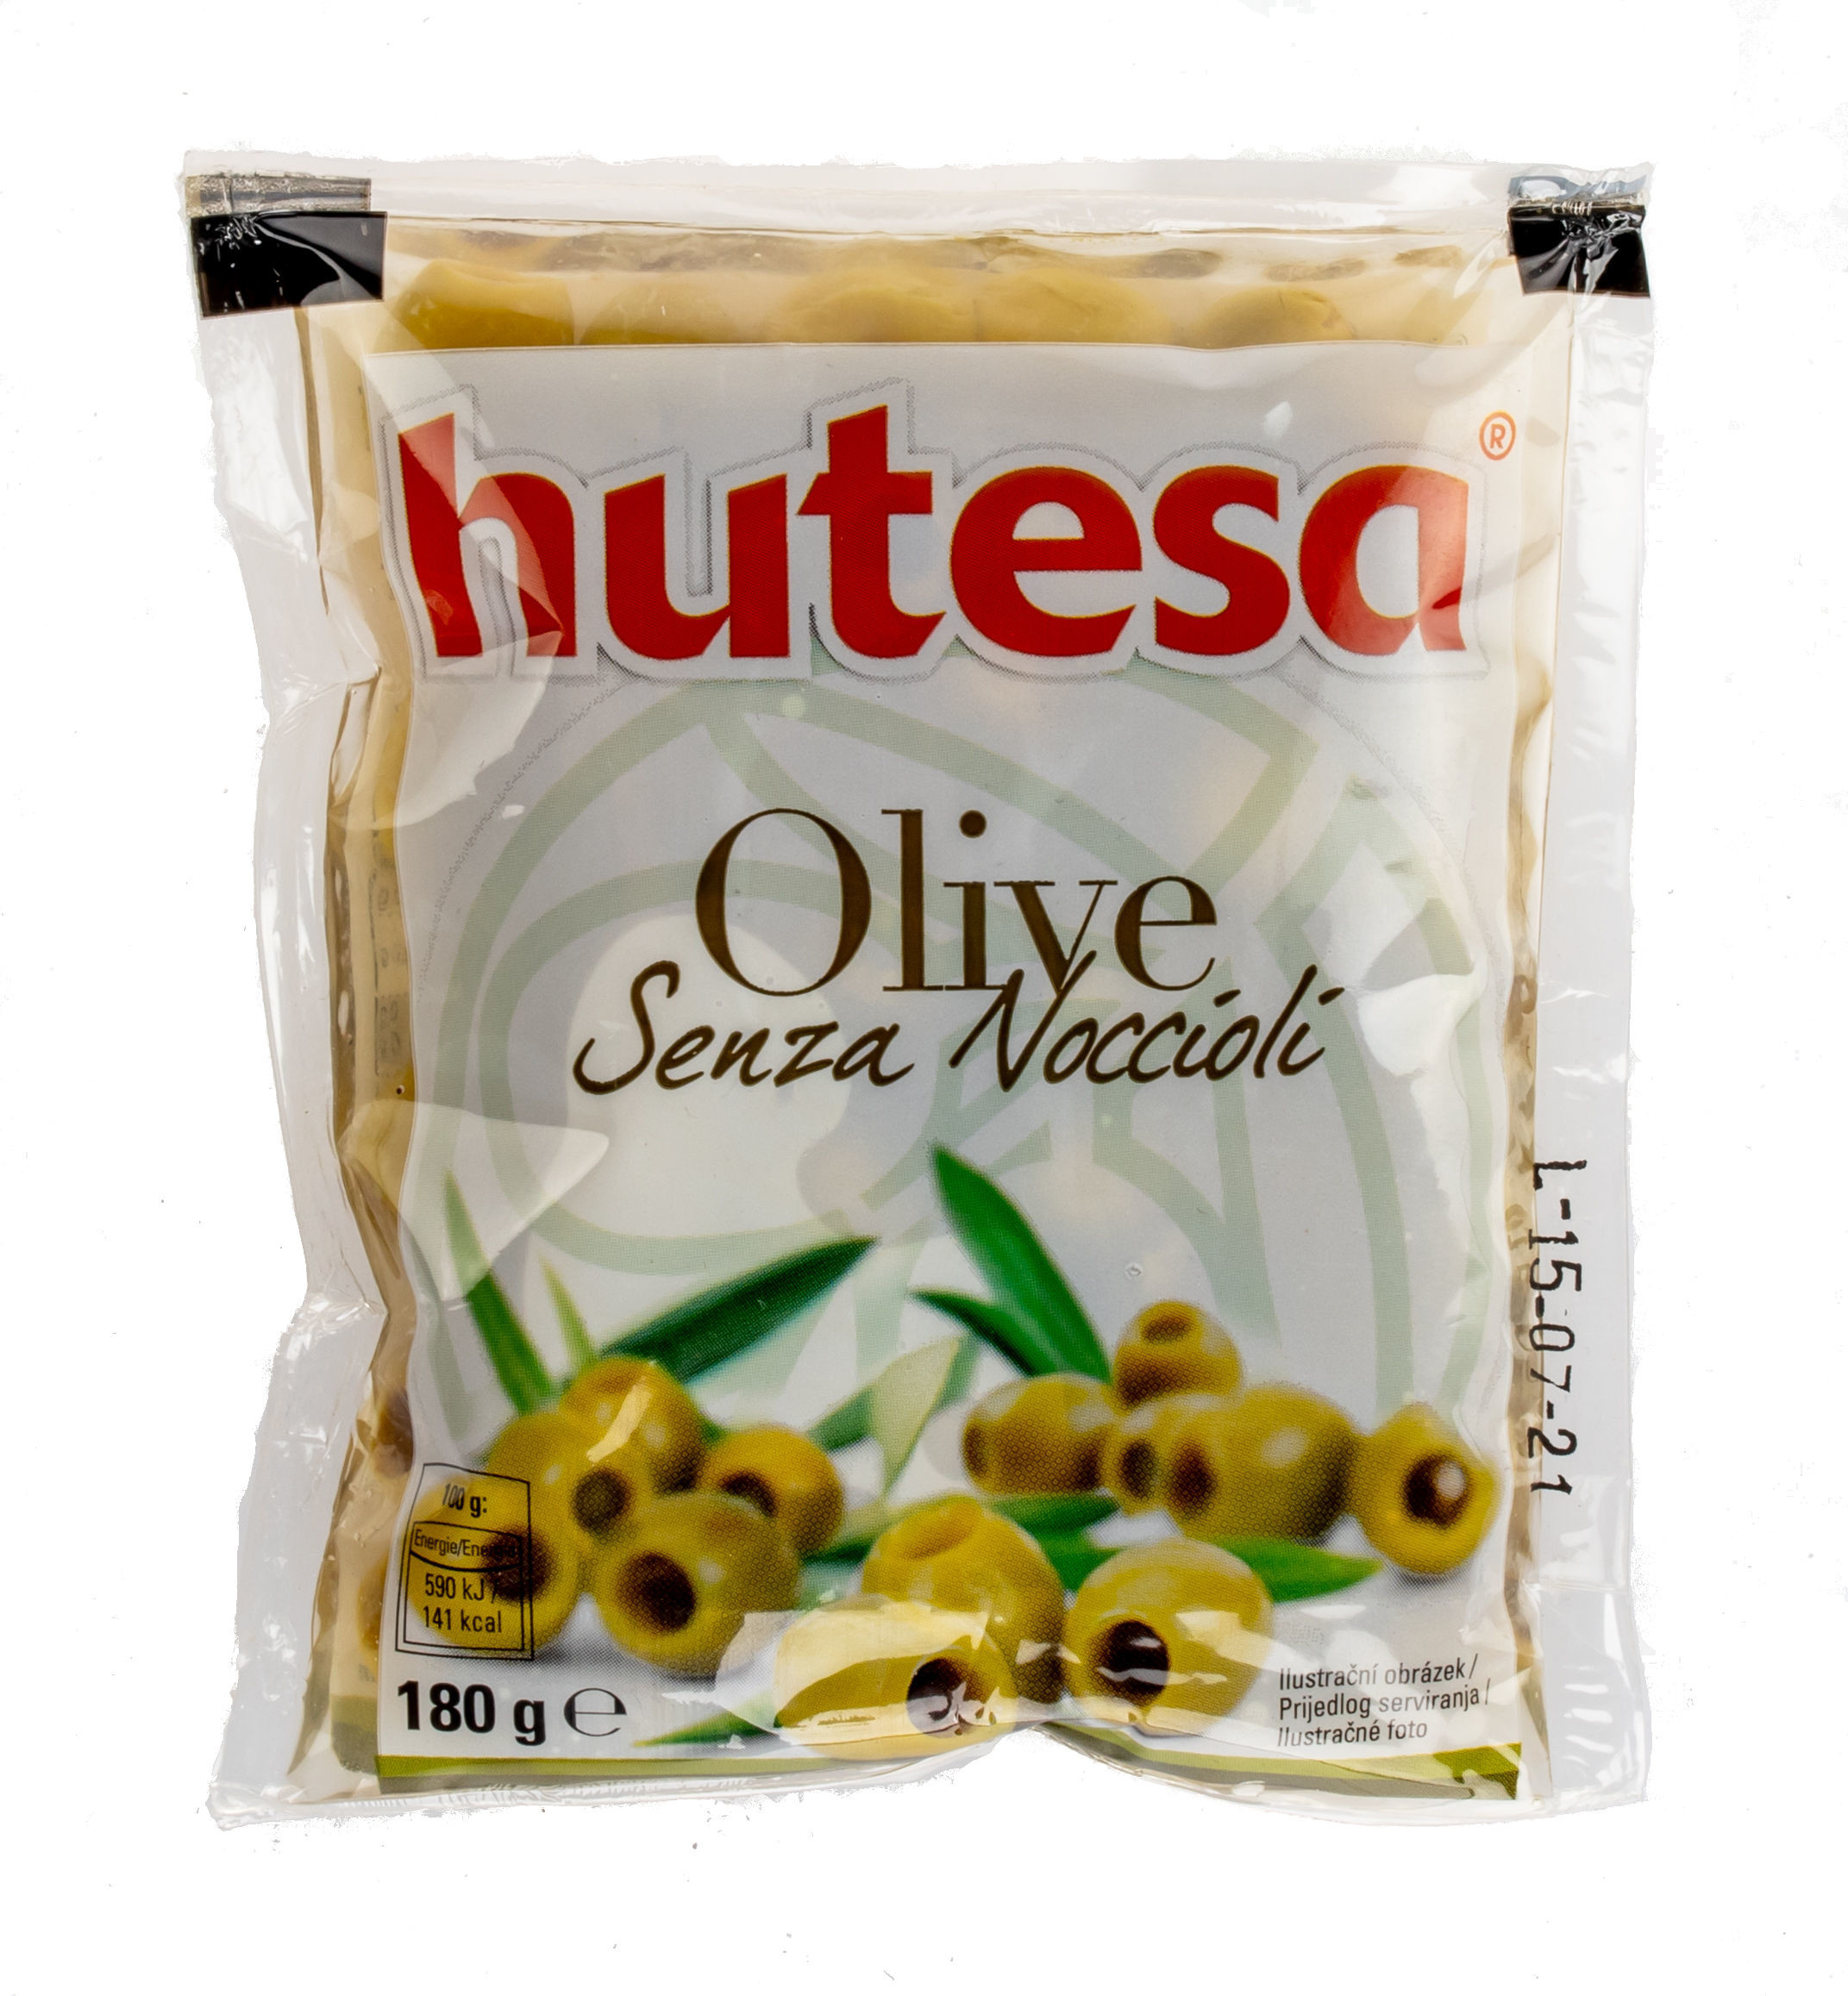 Green olives pitted (plastic bag)